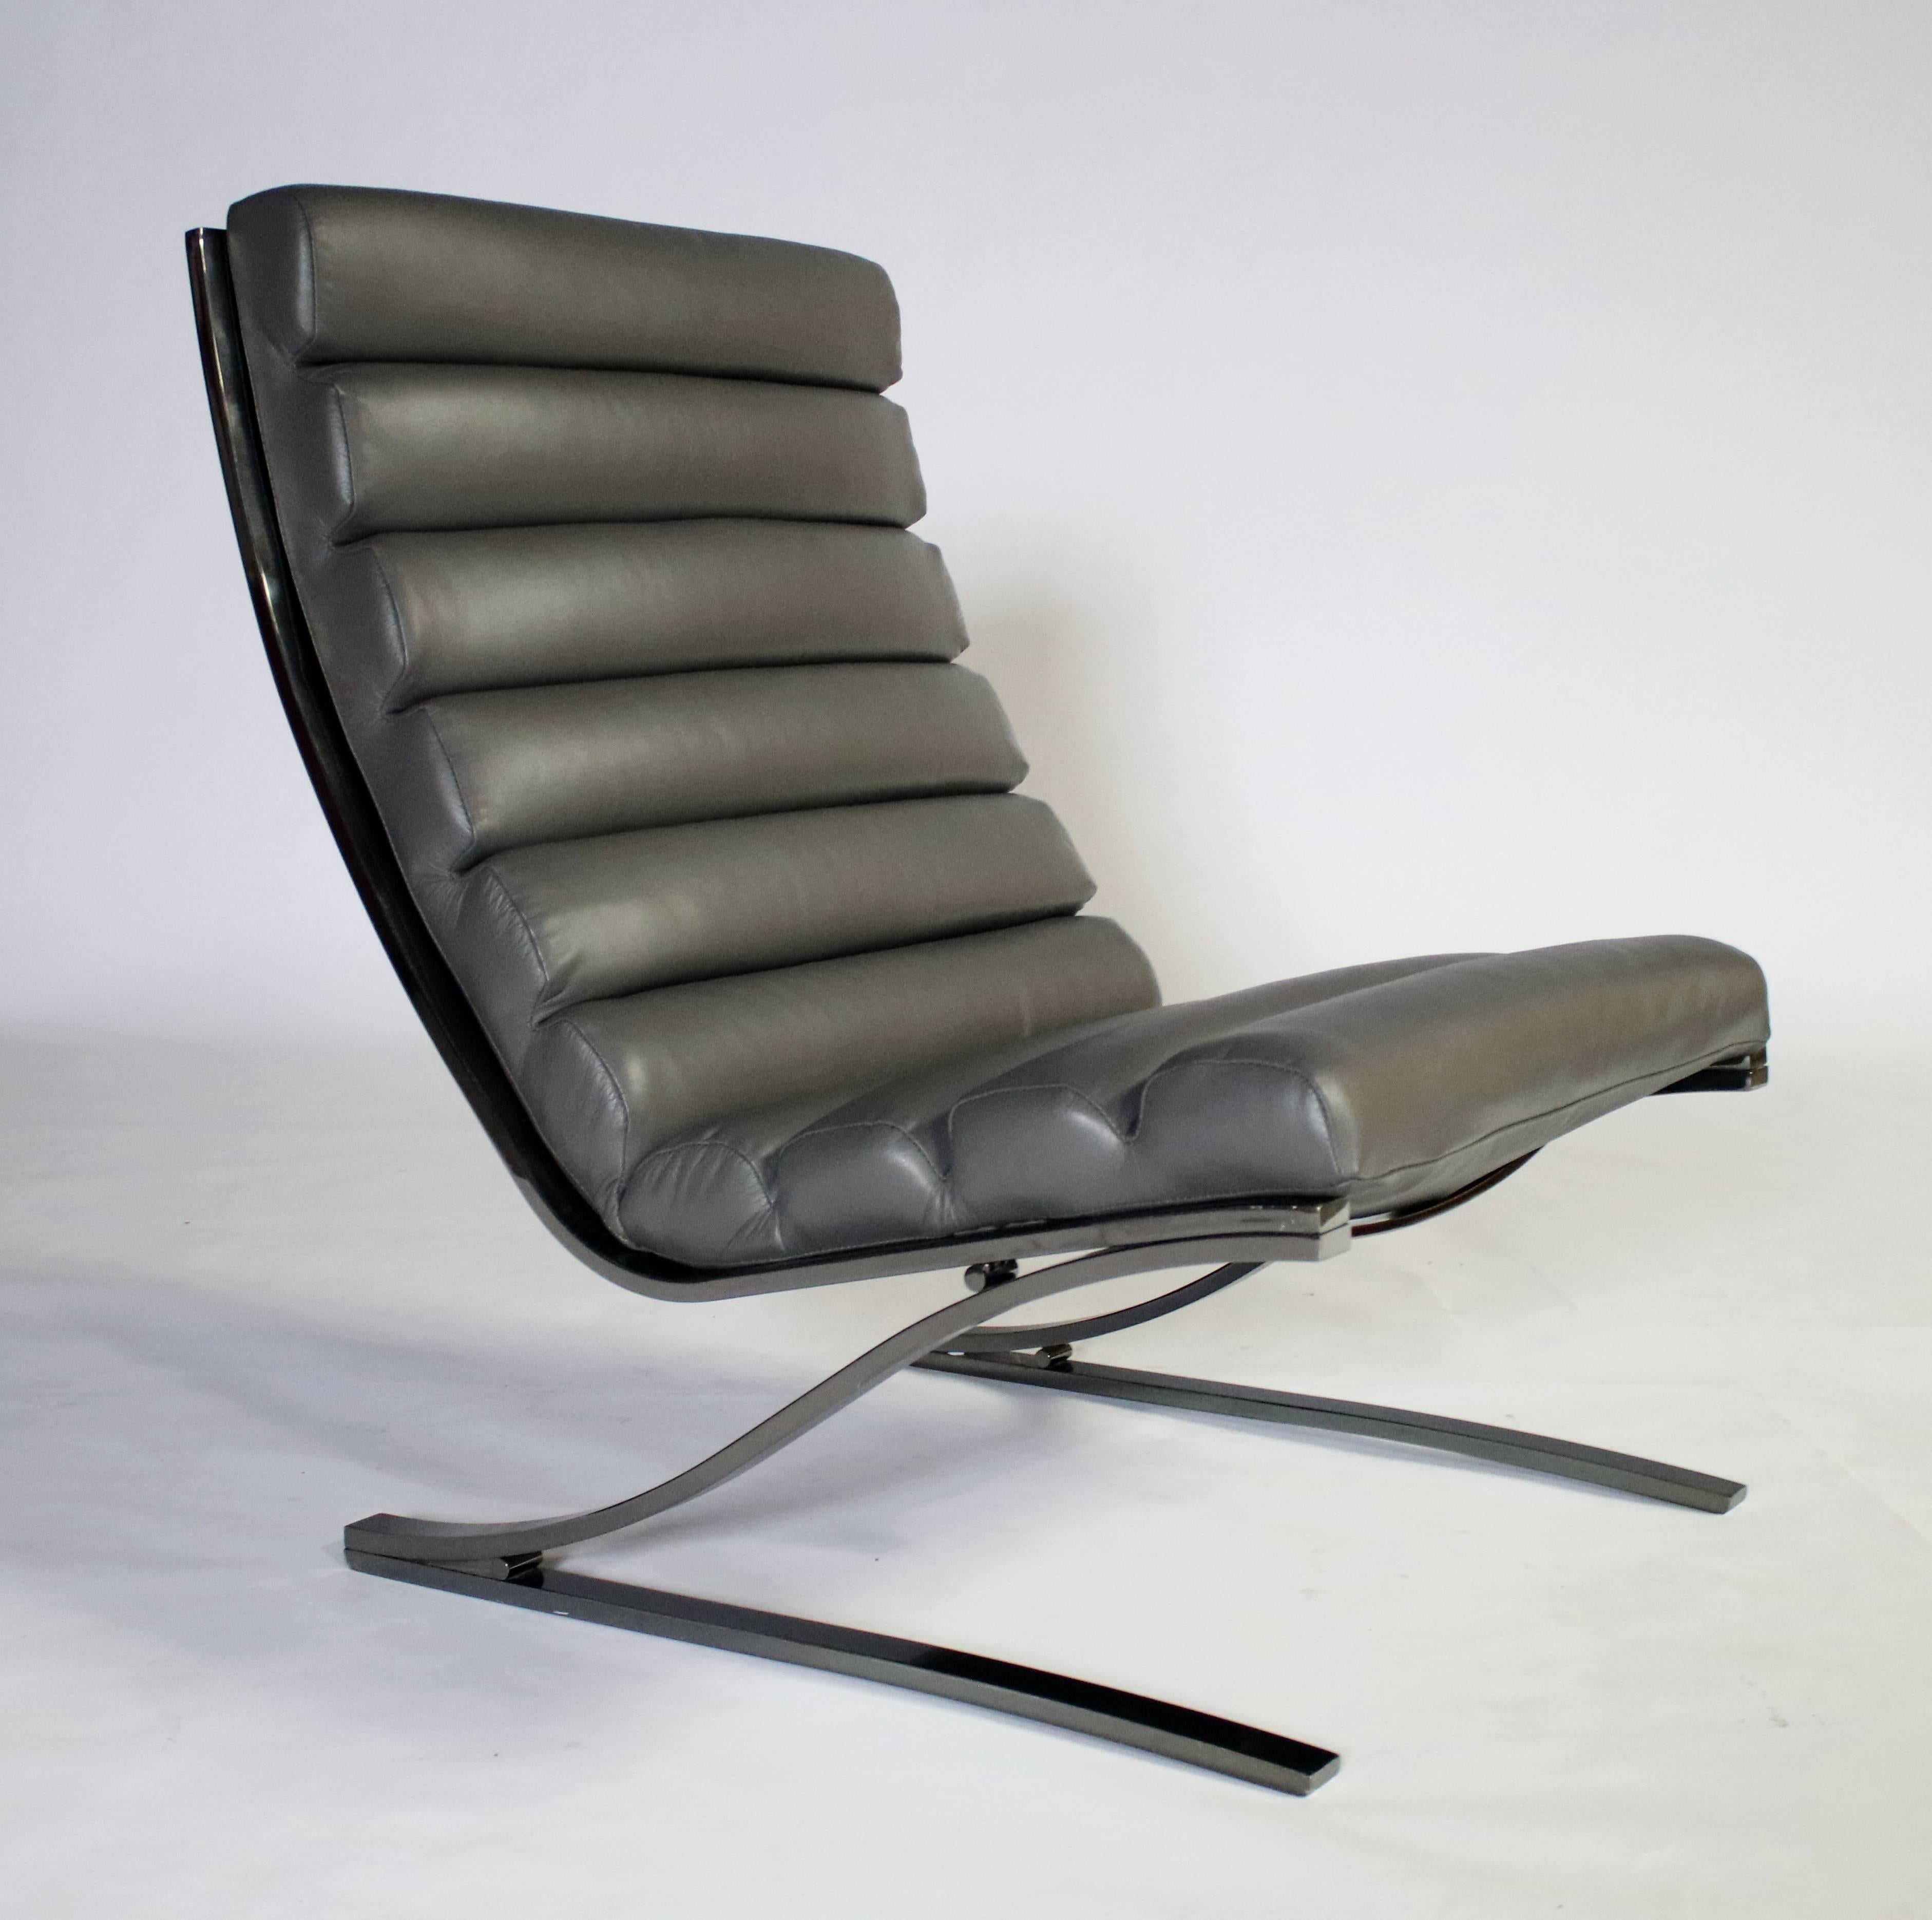 Steel Design Institute of America Cantilevered Lounge Chair and Ottoman